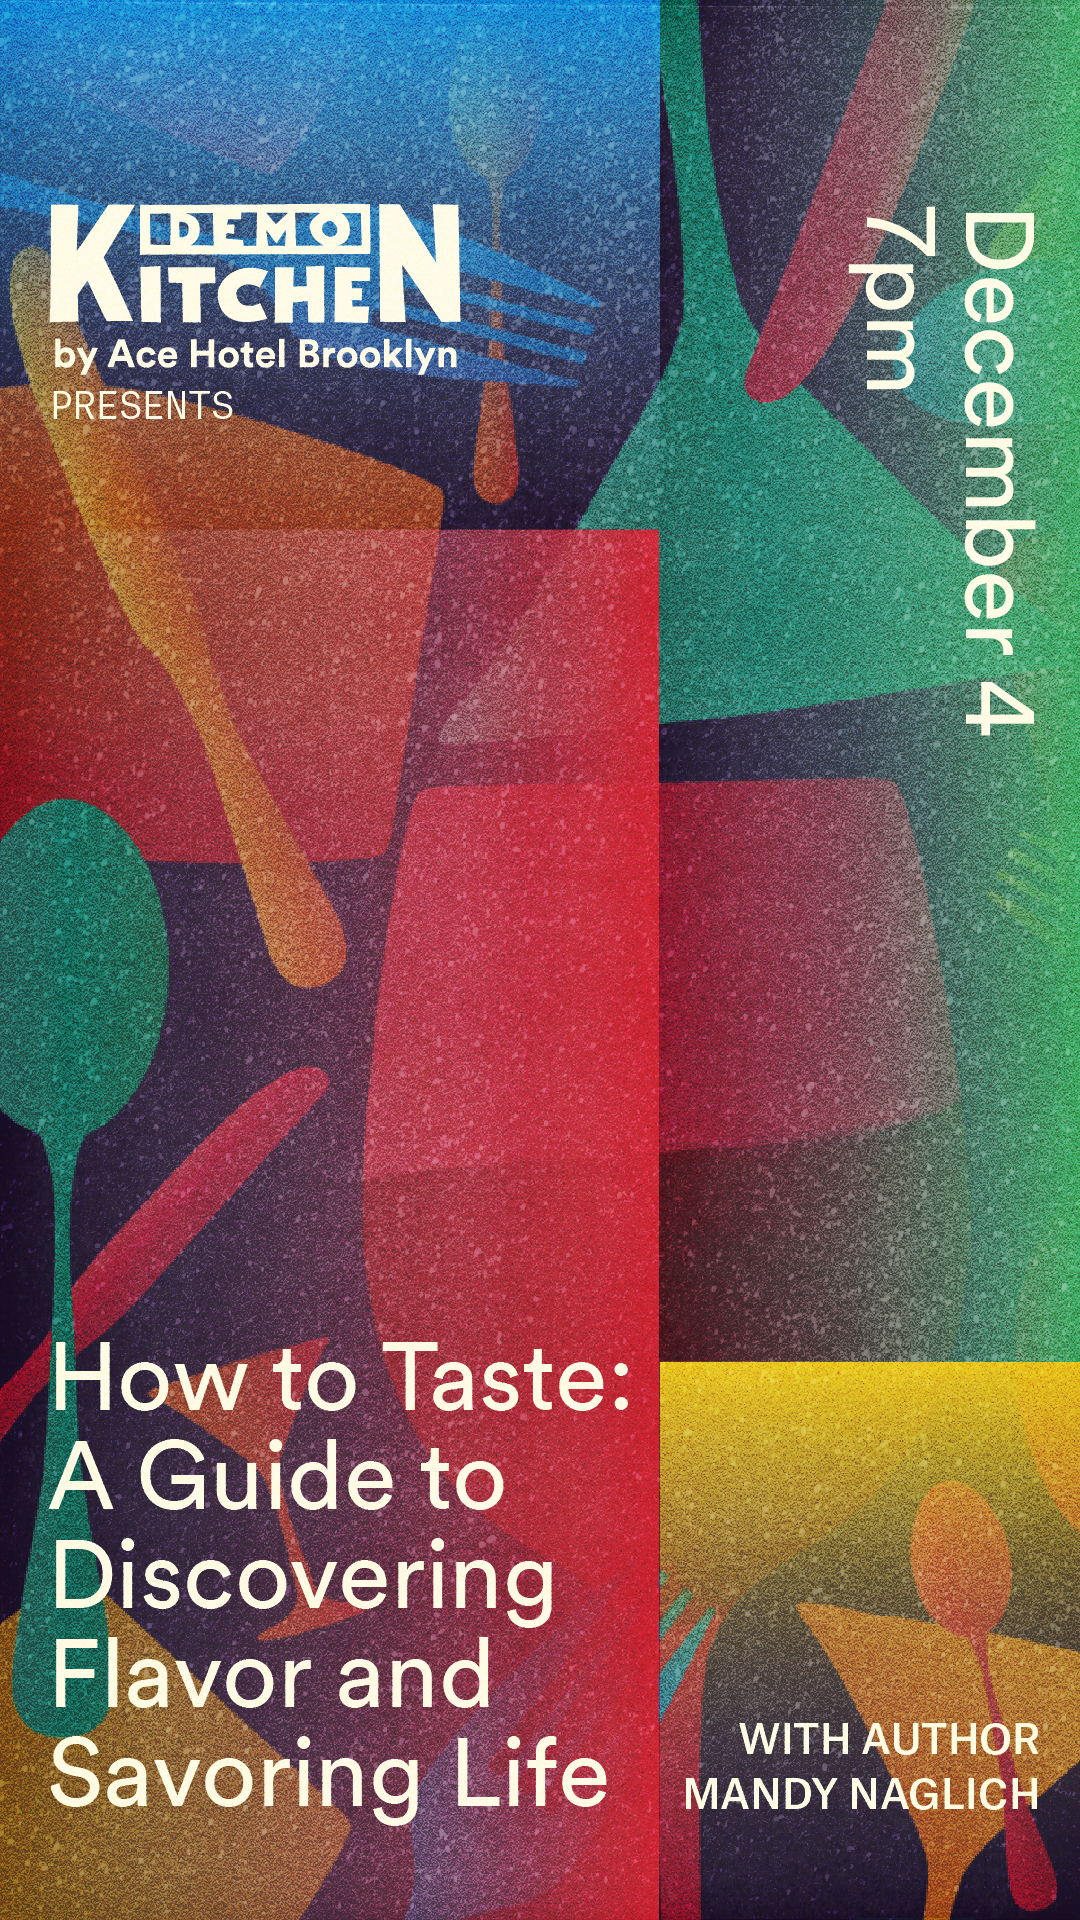 Mandy Naglich how to taste flyer for promo